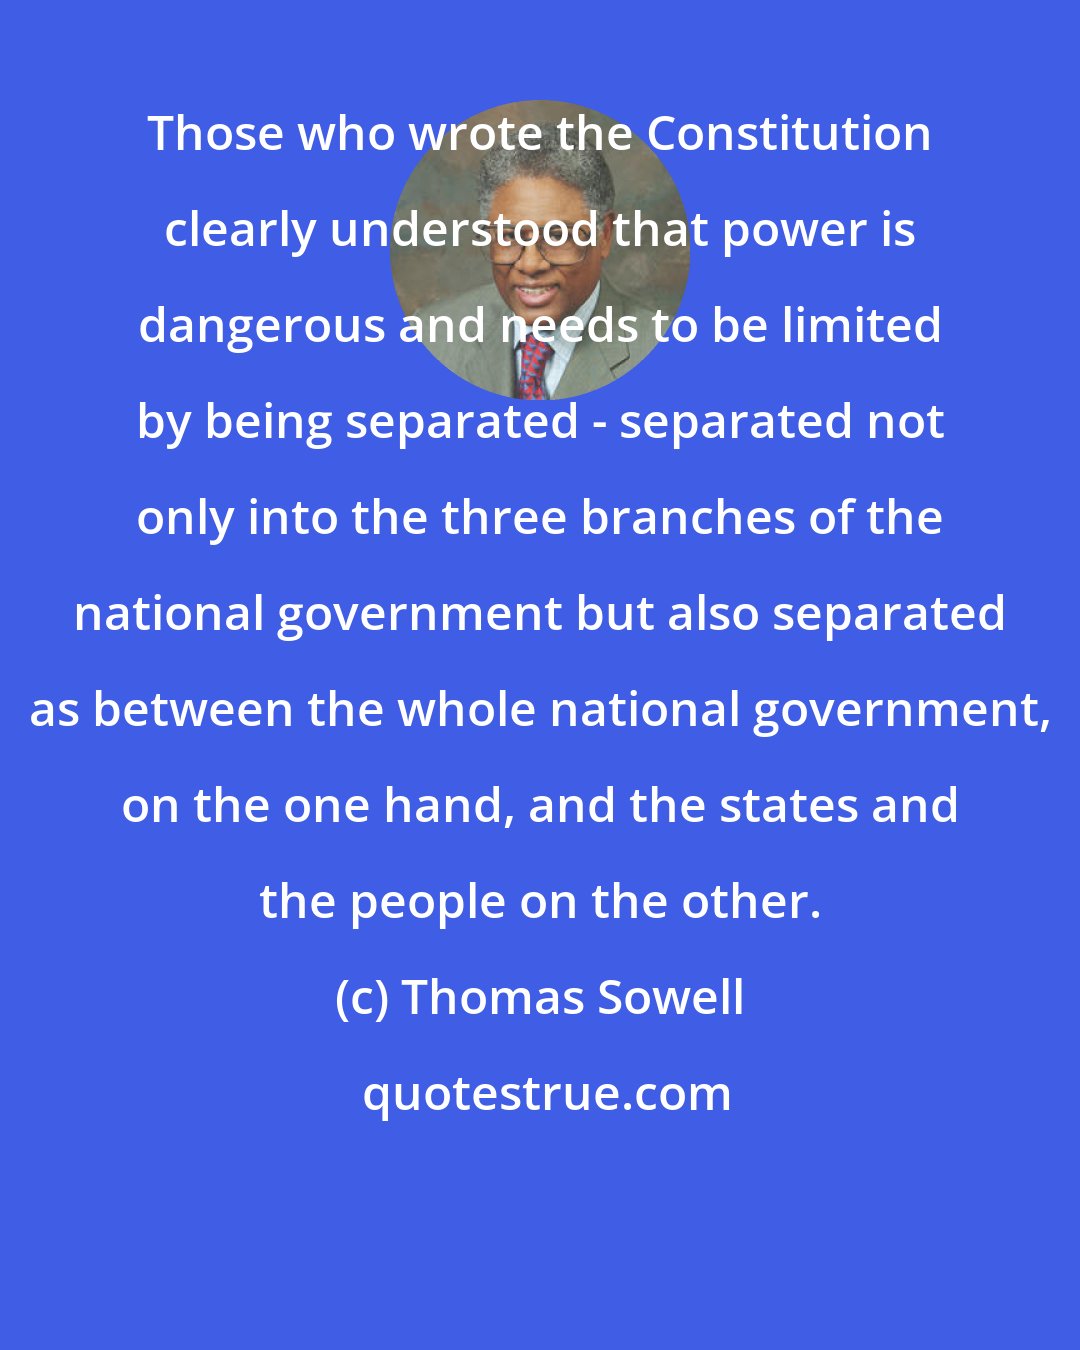 Thomas Sowell: Those who wrote the Constitution clearly understood that power is dangerous and needs to be limited by being separated - separated not only into the three branches of the national government but also separated as between the whole national government, on the one hand, and the states and the people on the other.